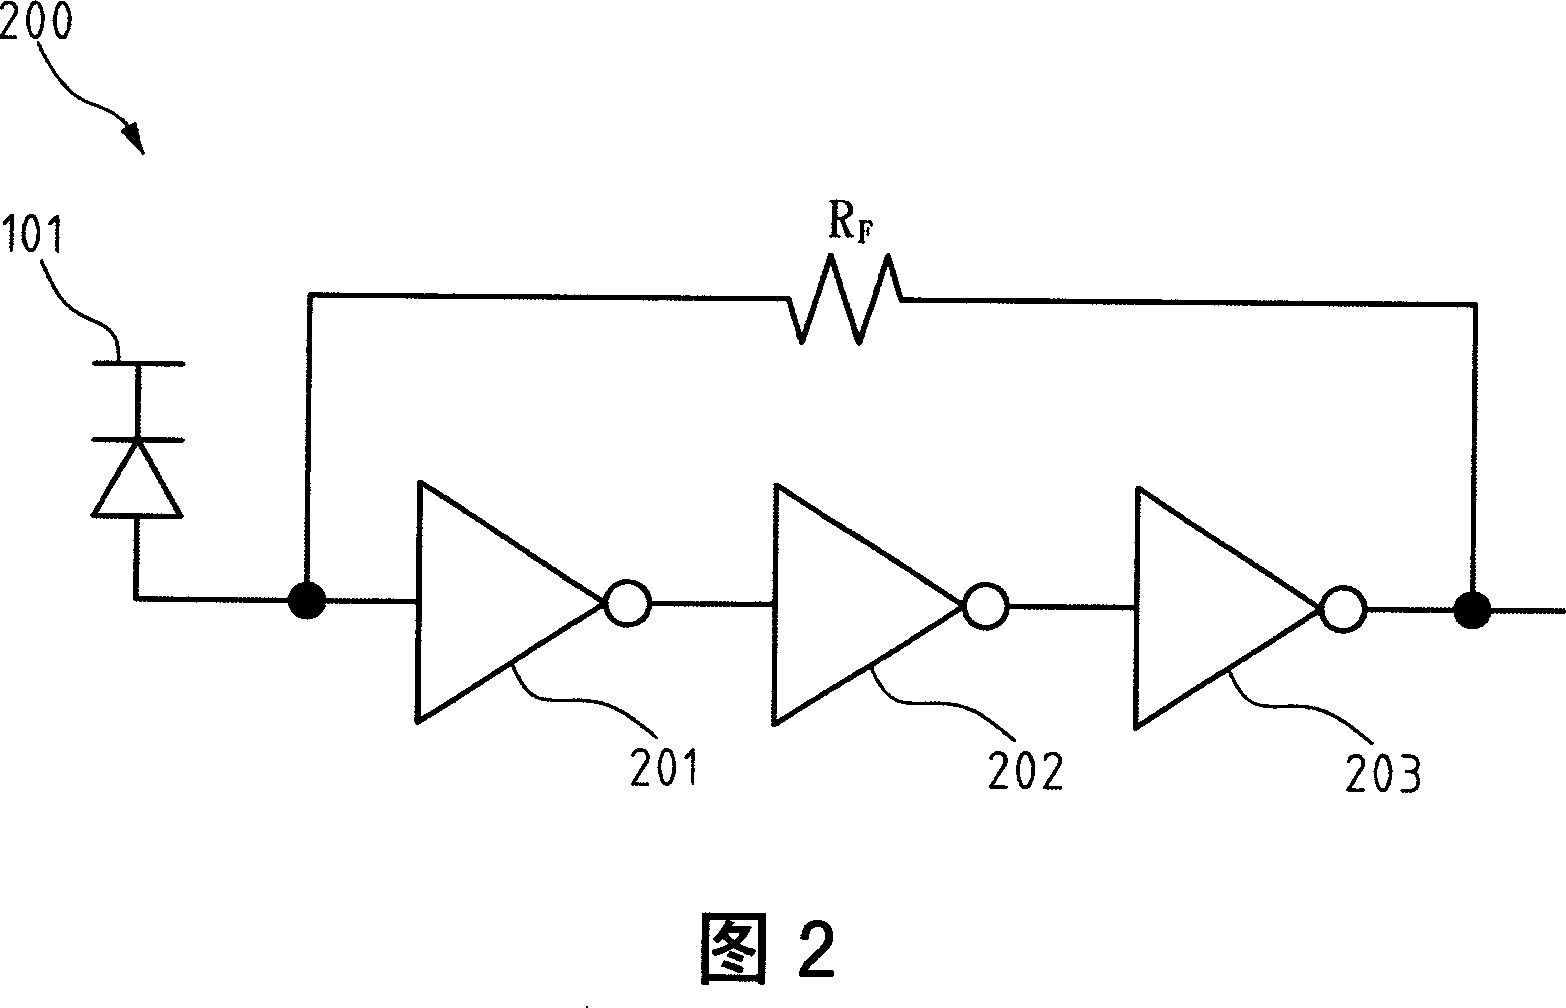 Transimpedance amplifier with negative impedance compensation function